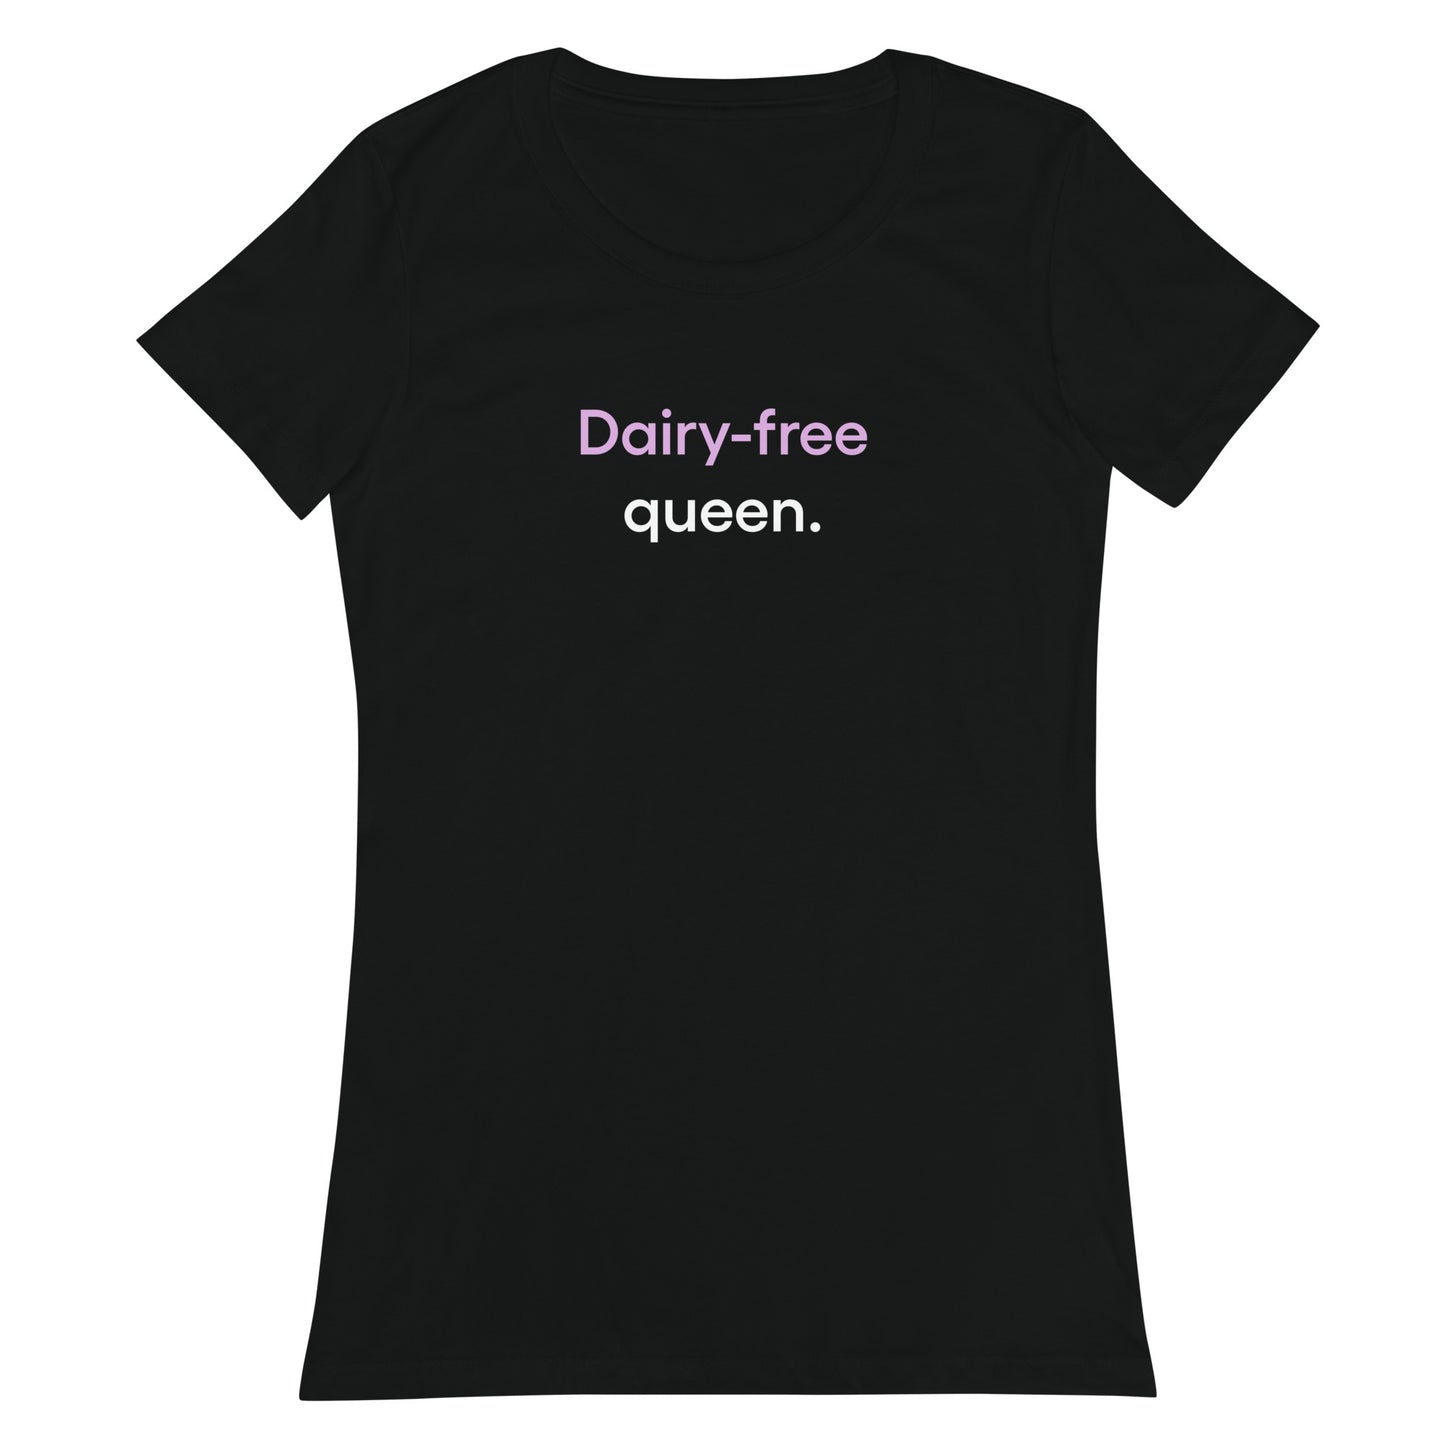 Dairy-free queen | Women’s fitted t-shirt